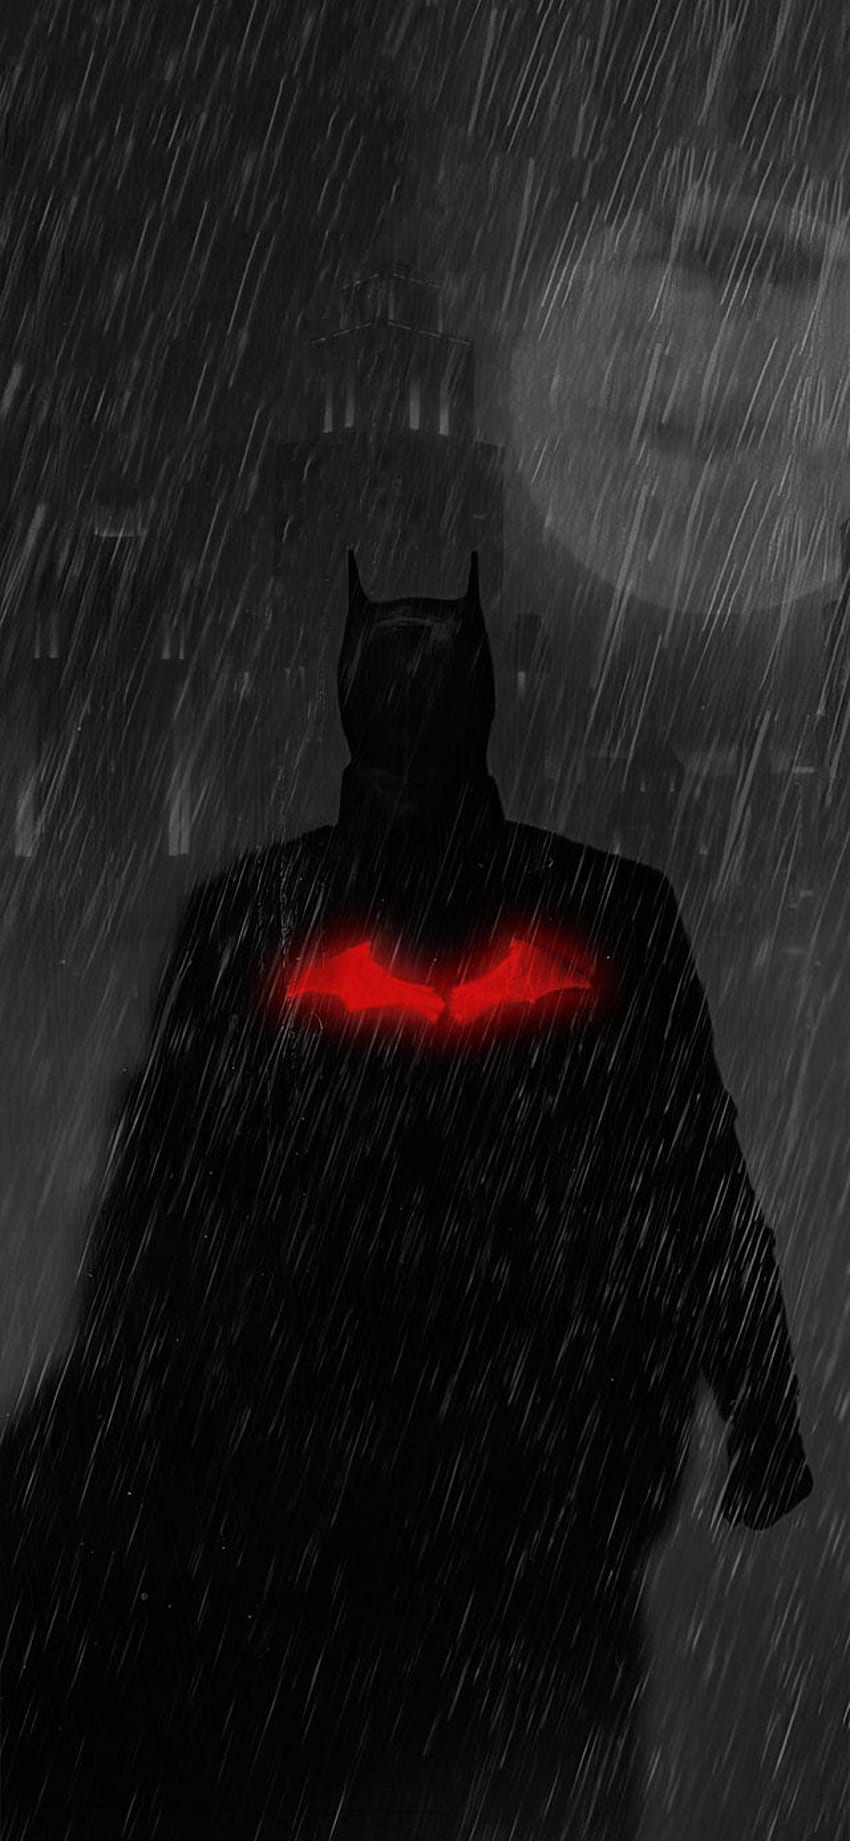 Couple Of IPhone I Made After Wanting A The Batman But Not Wanting An Intense Red Color! : R Thebatman, The Batman Iphone HD phone wallpaper